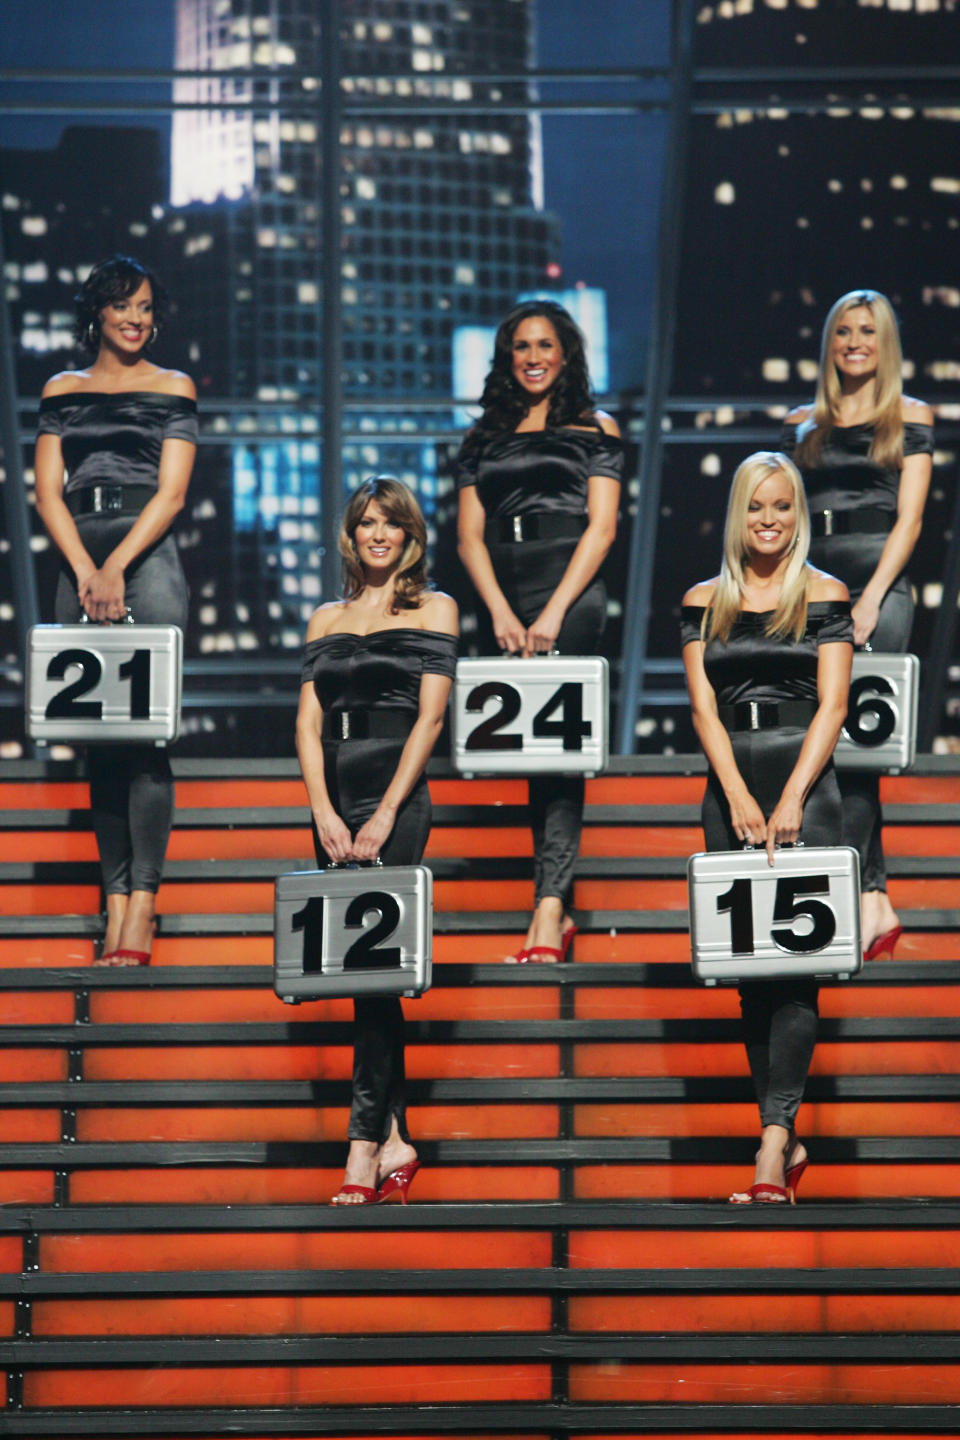 DEAL OR NO DEAL -- Episode 241 -- Pictured: (l-r, number order) Jill Manas (12), Brooke Long (15), Tameka Jacobs (21), Meghan Markle (24), Lindsay Clubine (26) -- (Photo by: Trae Patton/NBCU Photo Bank/NBCUniversal via Getty Images via Getty Images)